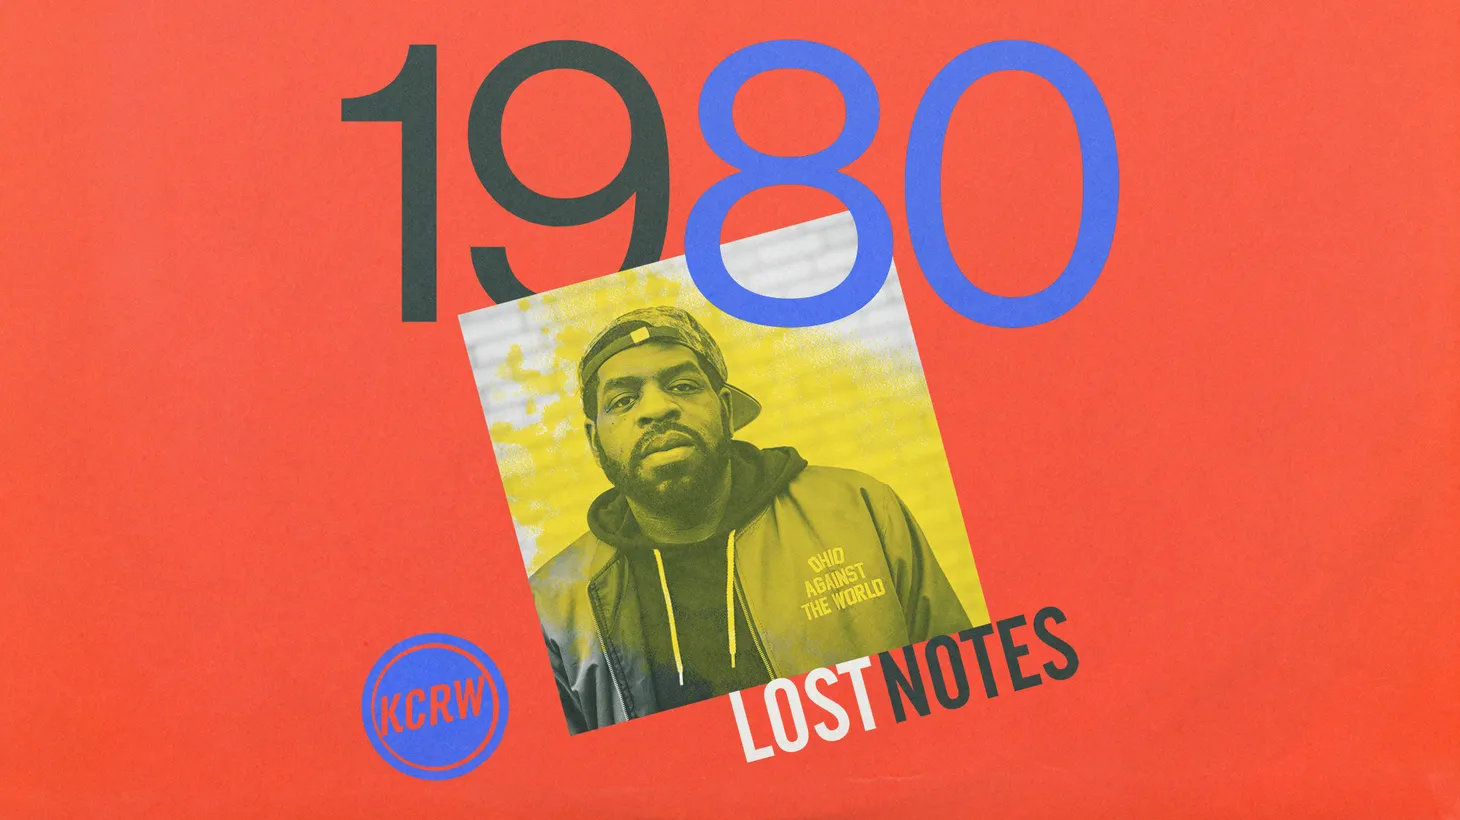 This season the poet and cultural critic Hanif Abdurraqib explores the year 1980. It was the brilliant, awkward and sometimes heartbreaking opening to a monumental decade in popular music.